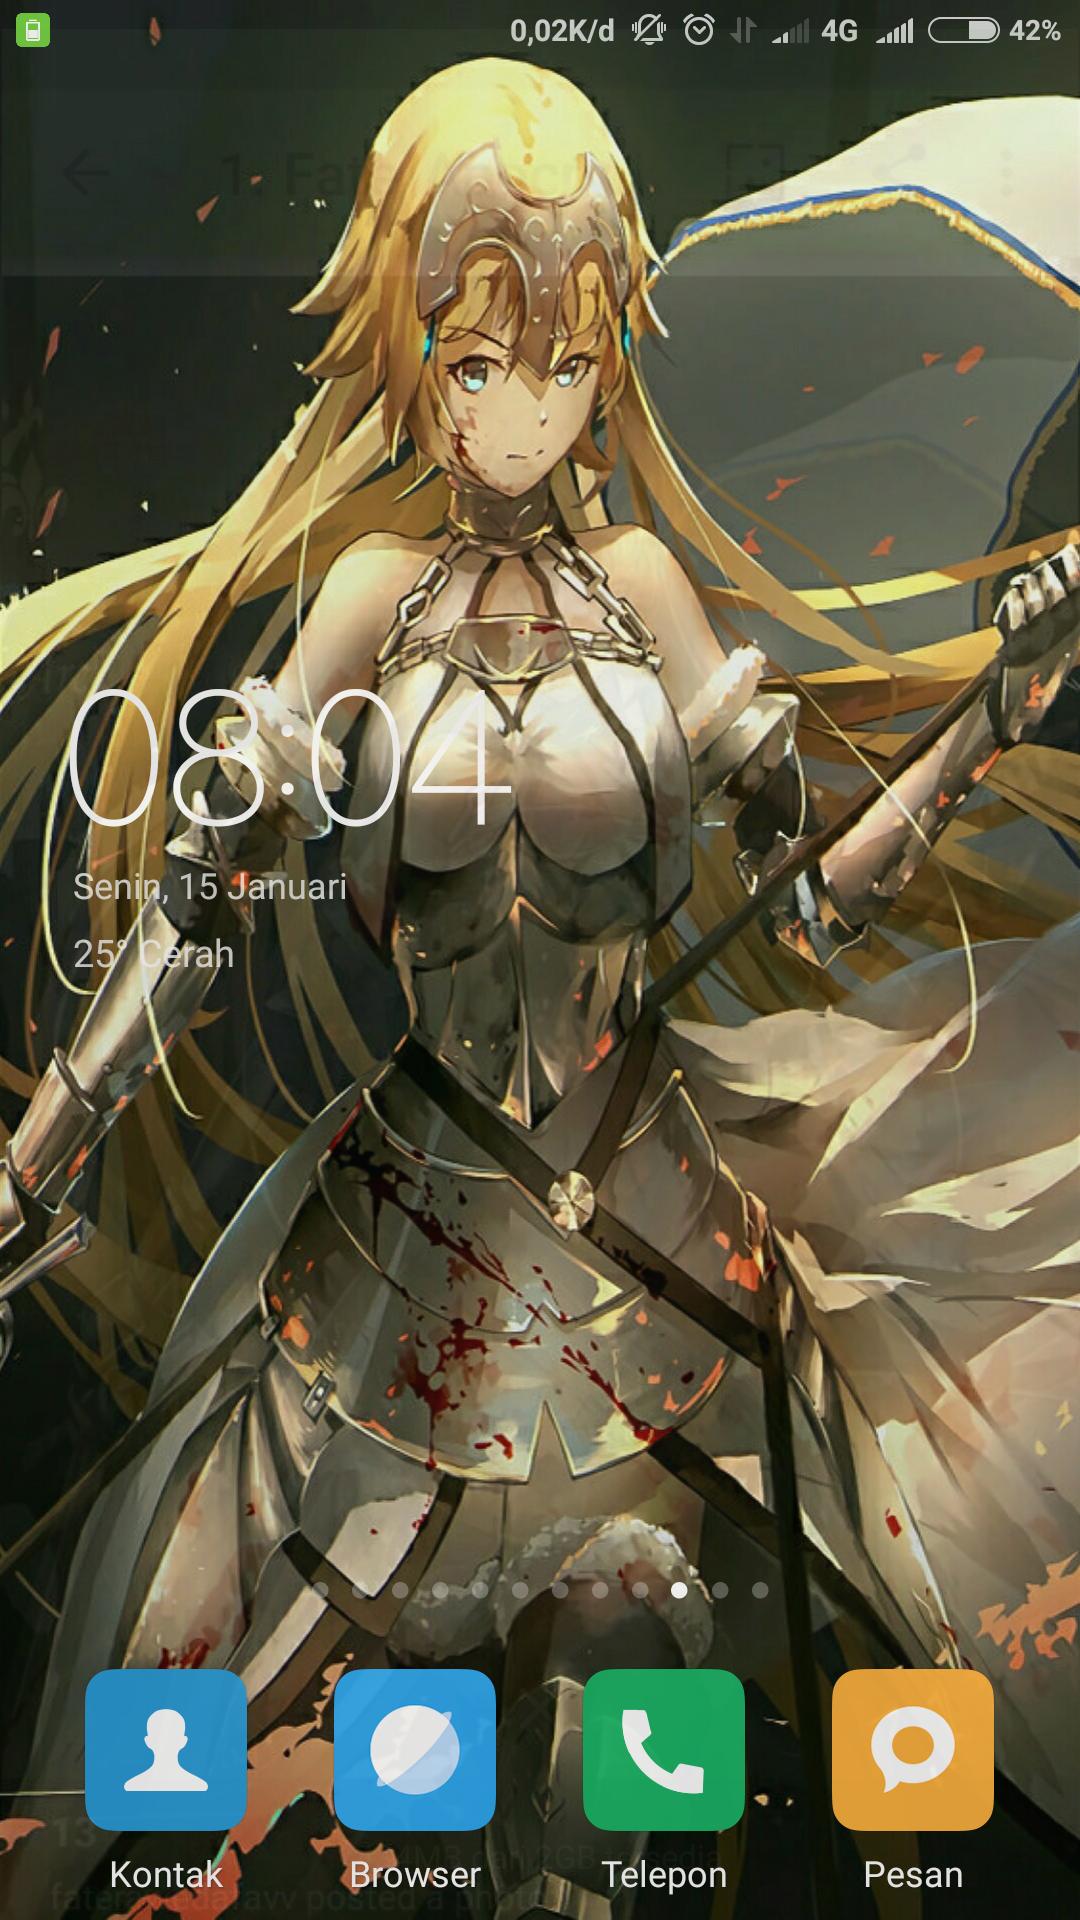 Android 用の Wallpapers Anime Hd Fate Apocrypha Apk をダウンロード